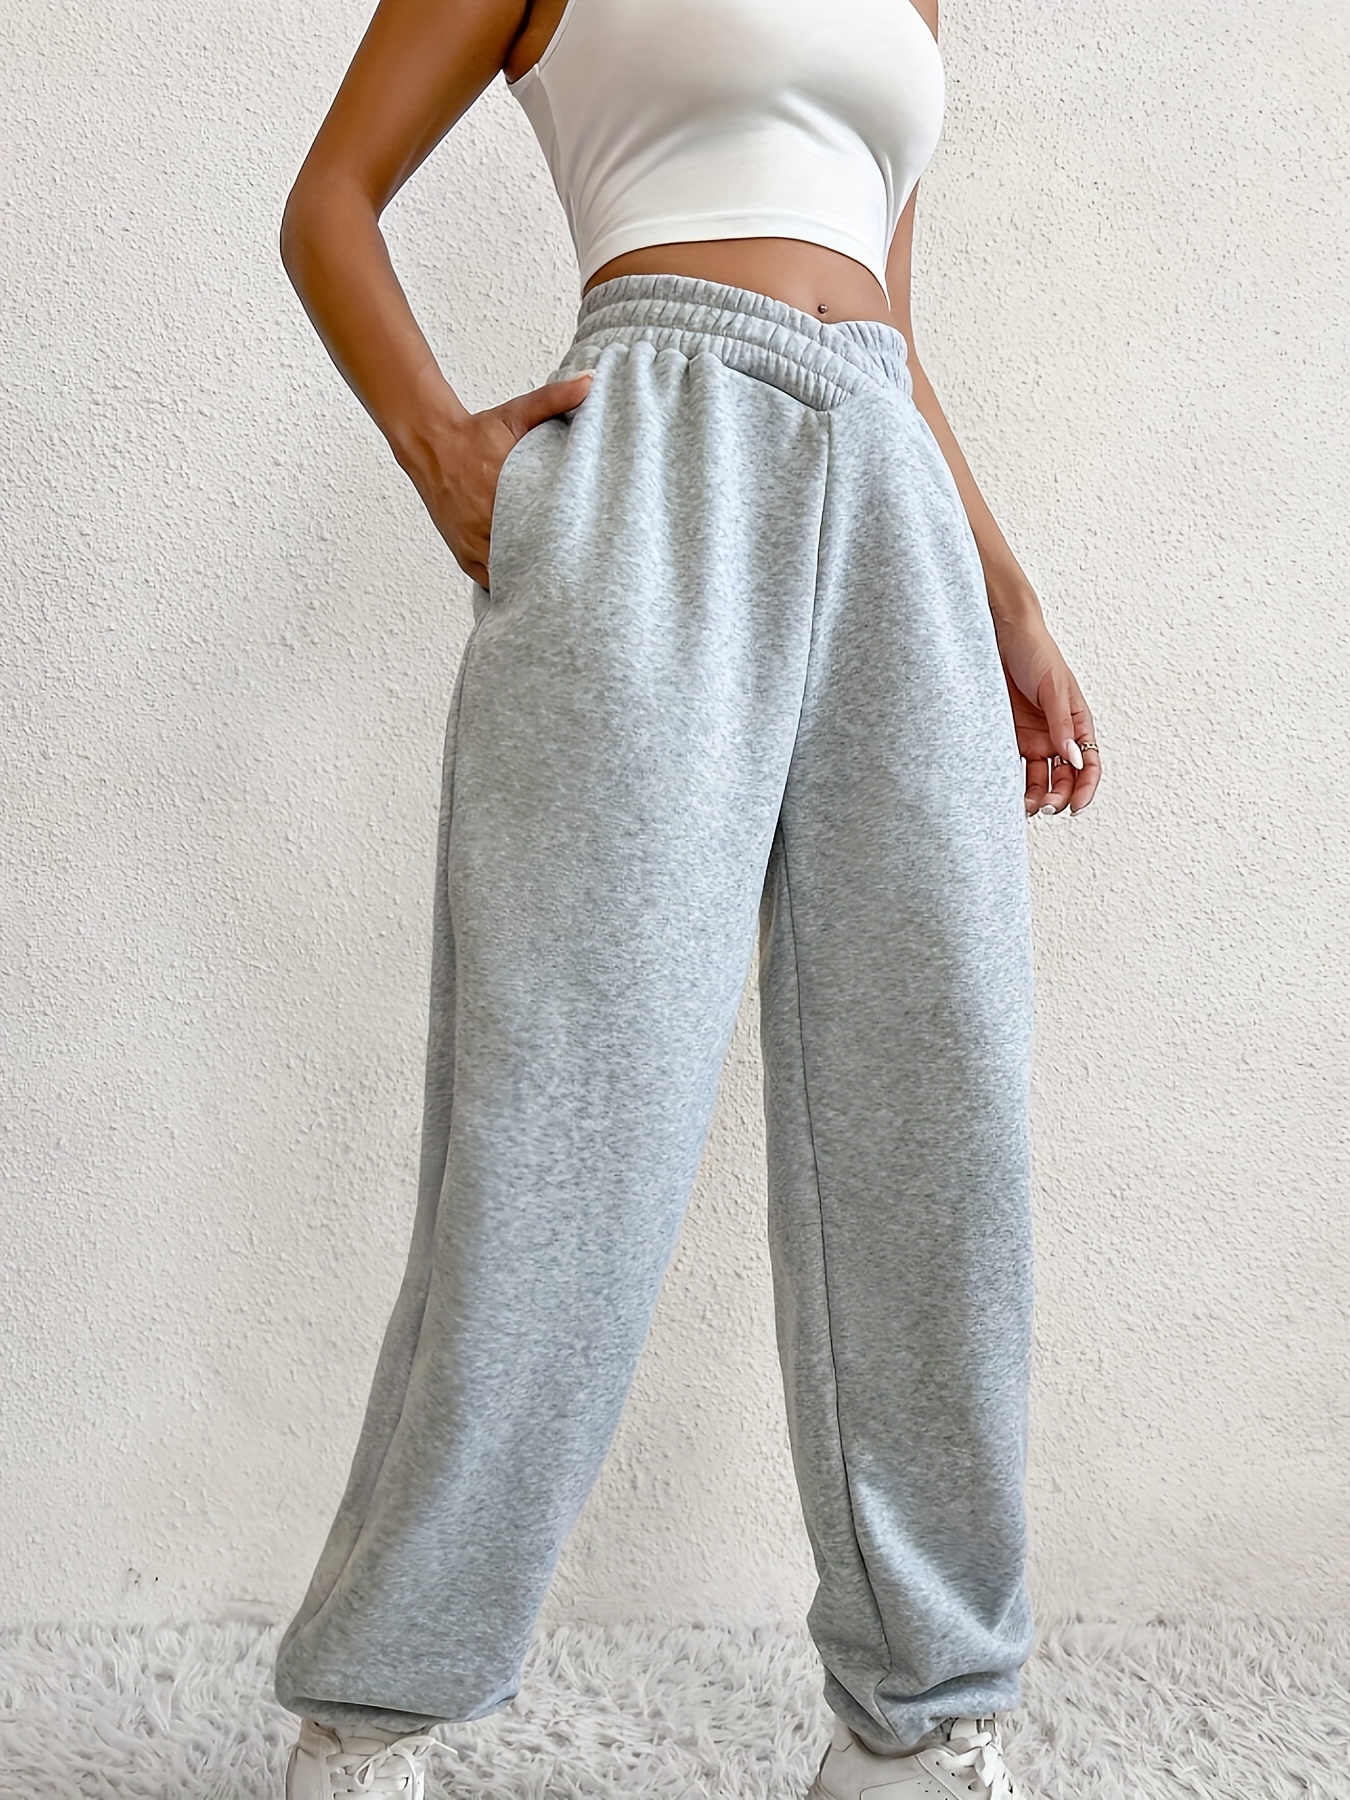 Grey Sweatpants Womens Solid Color Comfortable Fall and Winter Joggers Cozy  Regular Sport Pants